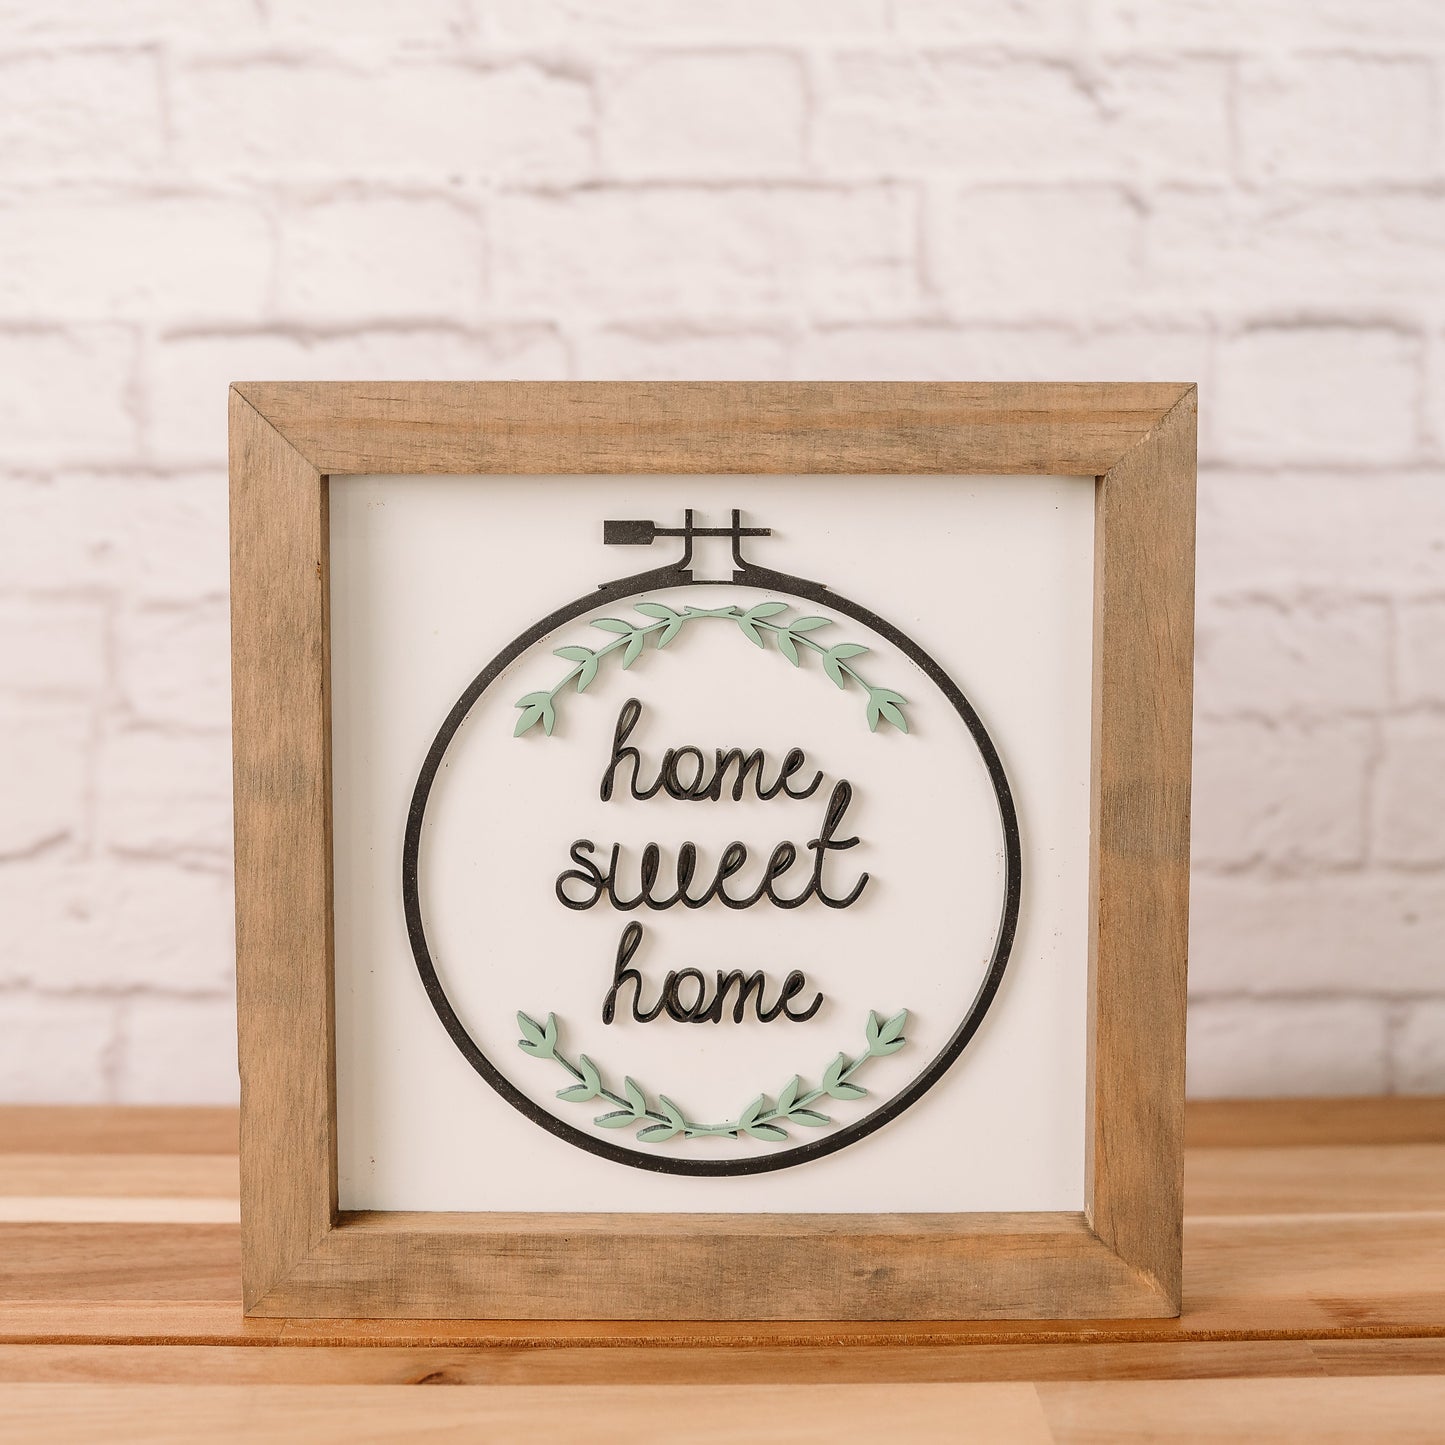 Home Sweet Home | 8x8 inch Wood Sign | Everyday Sign